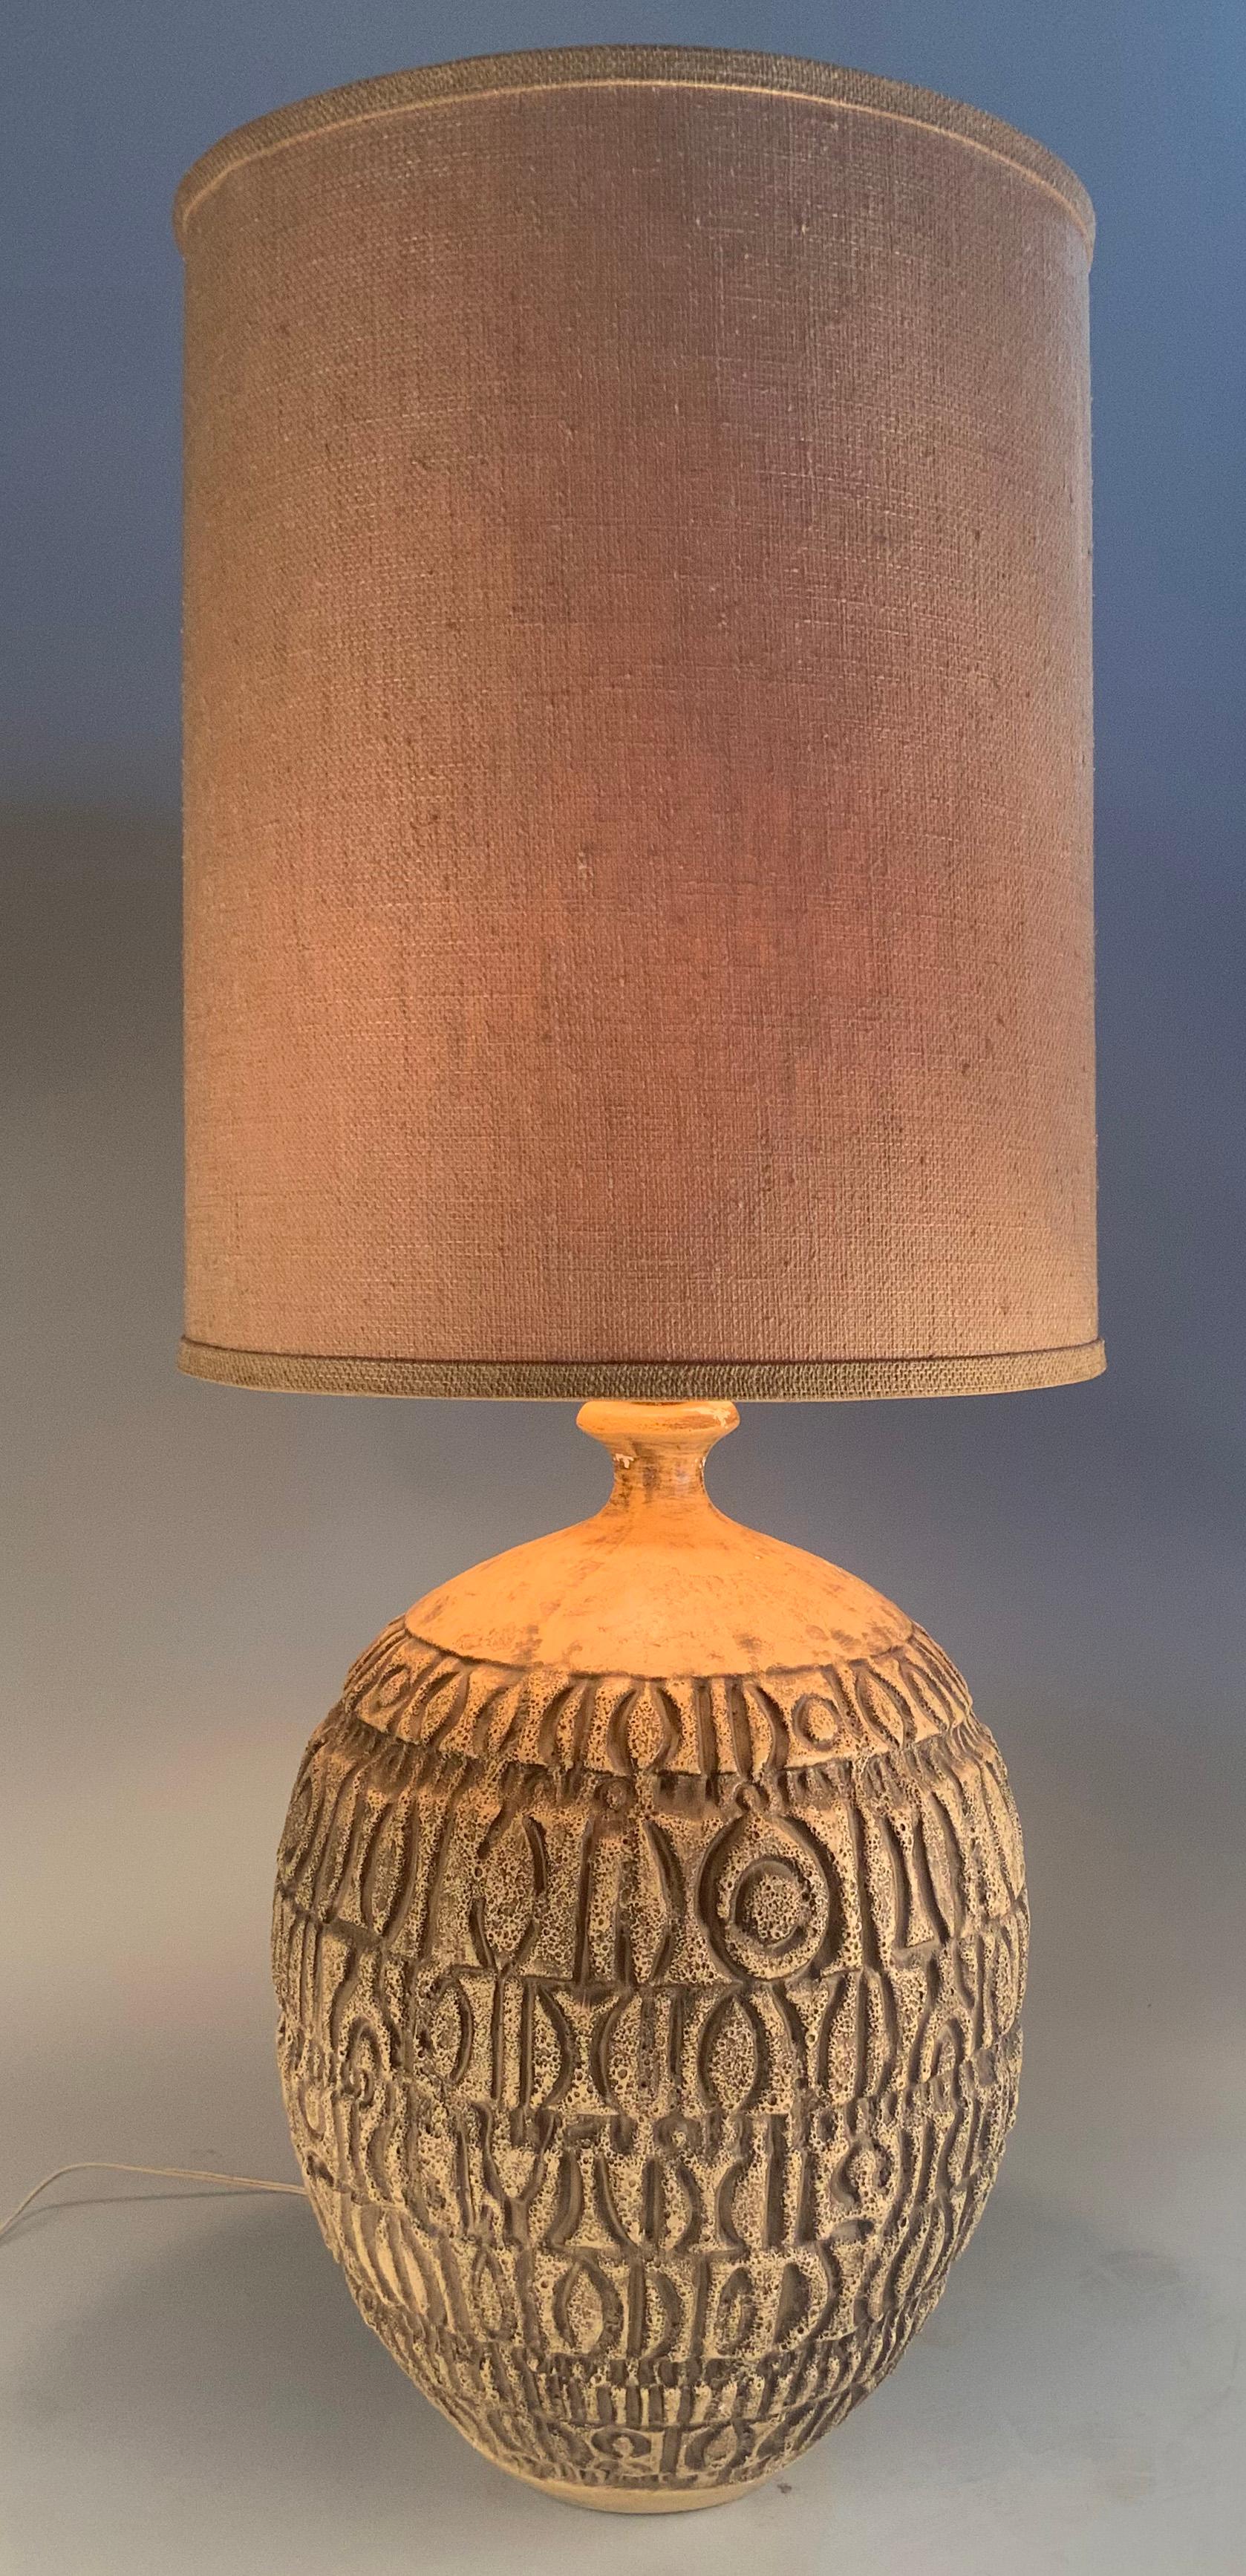 A beautiful large 1950's ceramic lamp with a light beige heavily textured volcanic finish with an abstract geometric pattern. Wonderful scale and proportions. Shade not included.